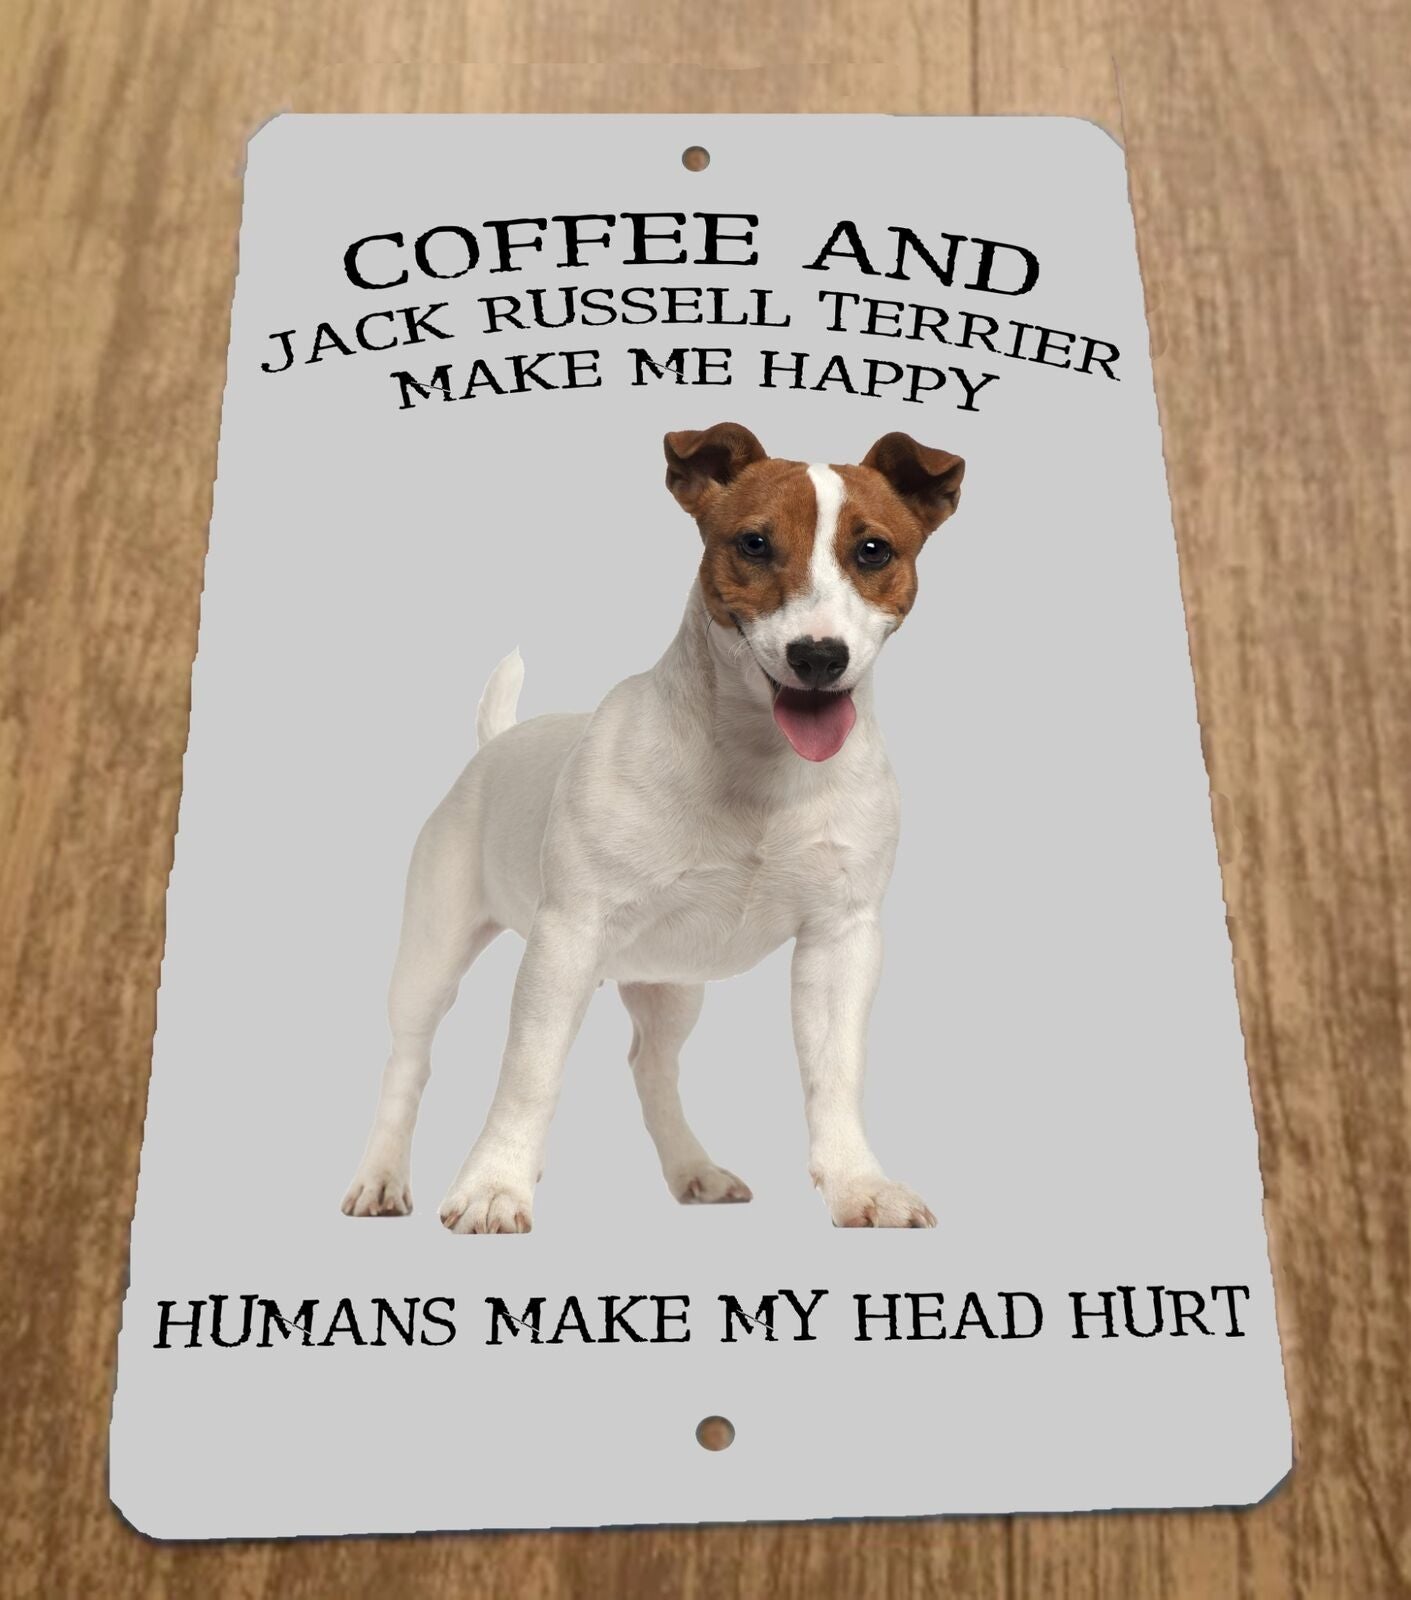 Coffee and Jack Russell Make Me Happy 8x12 Metal Wall Animal Dog Sign